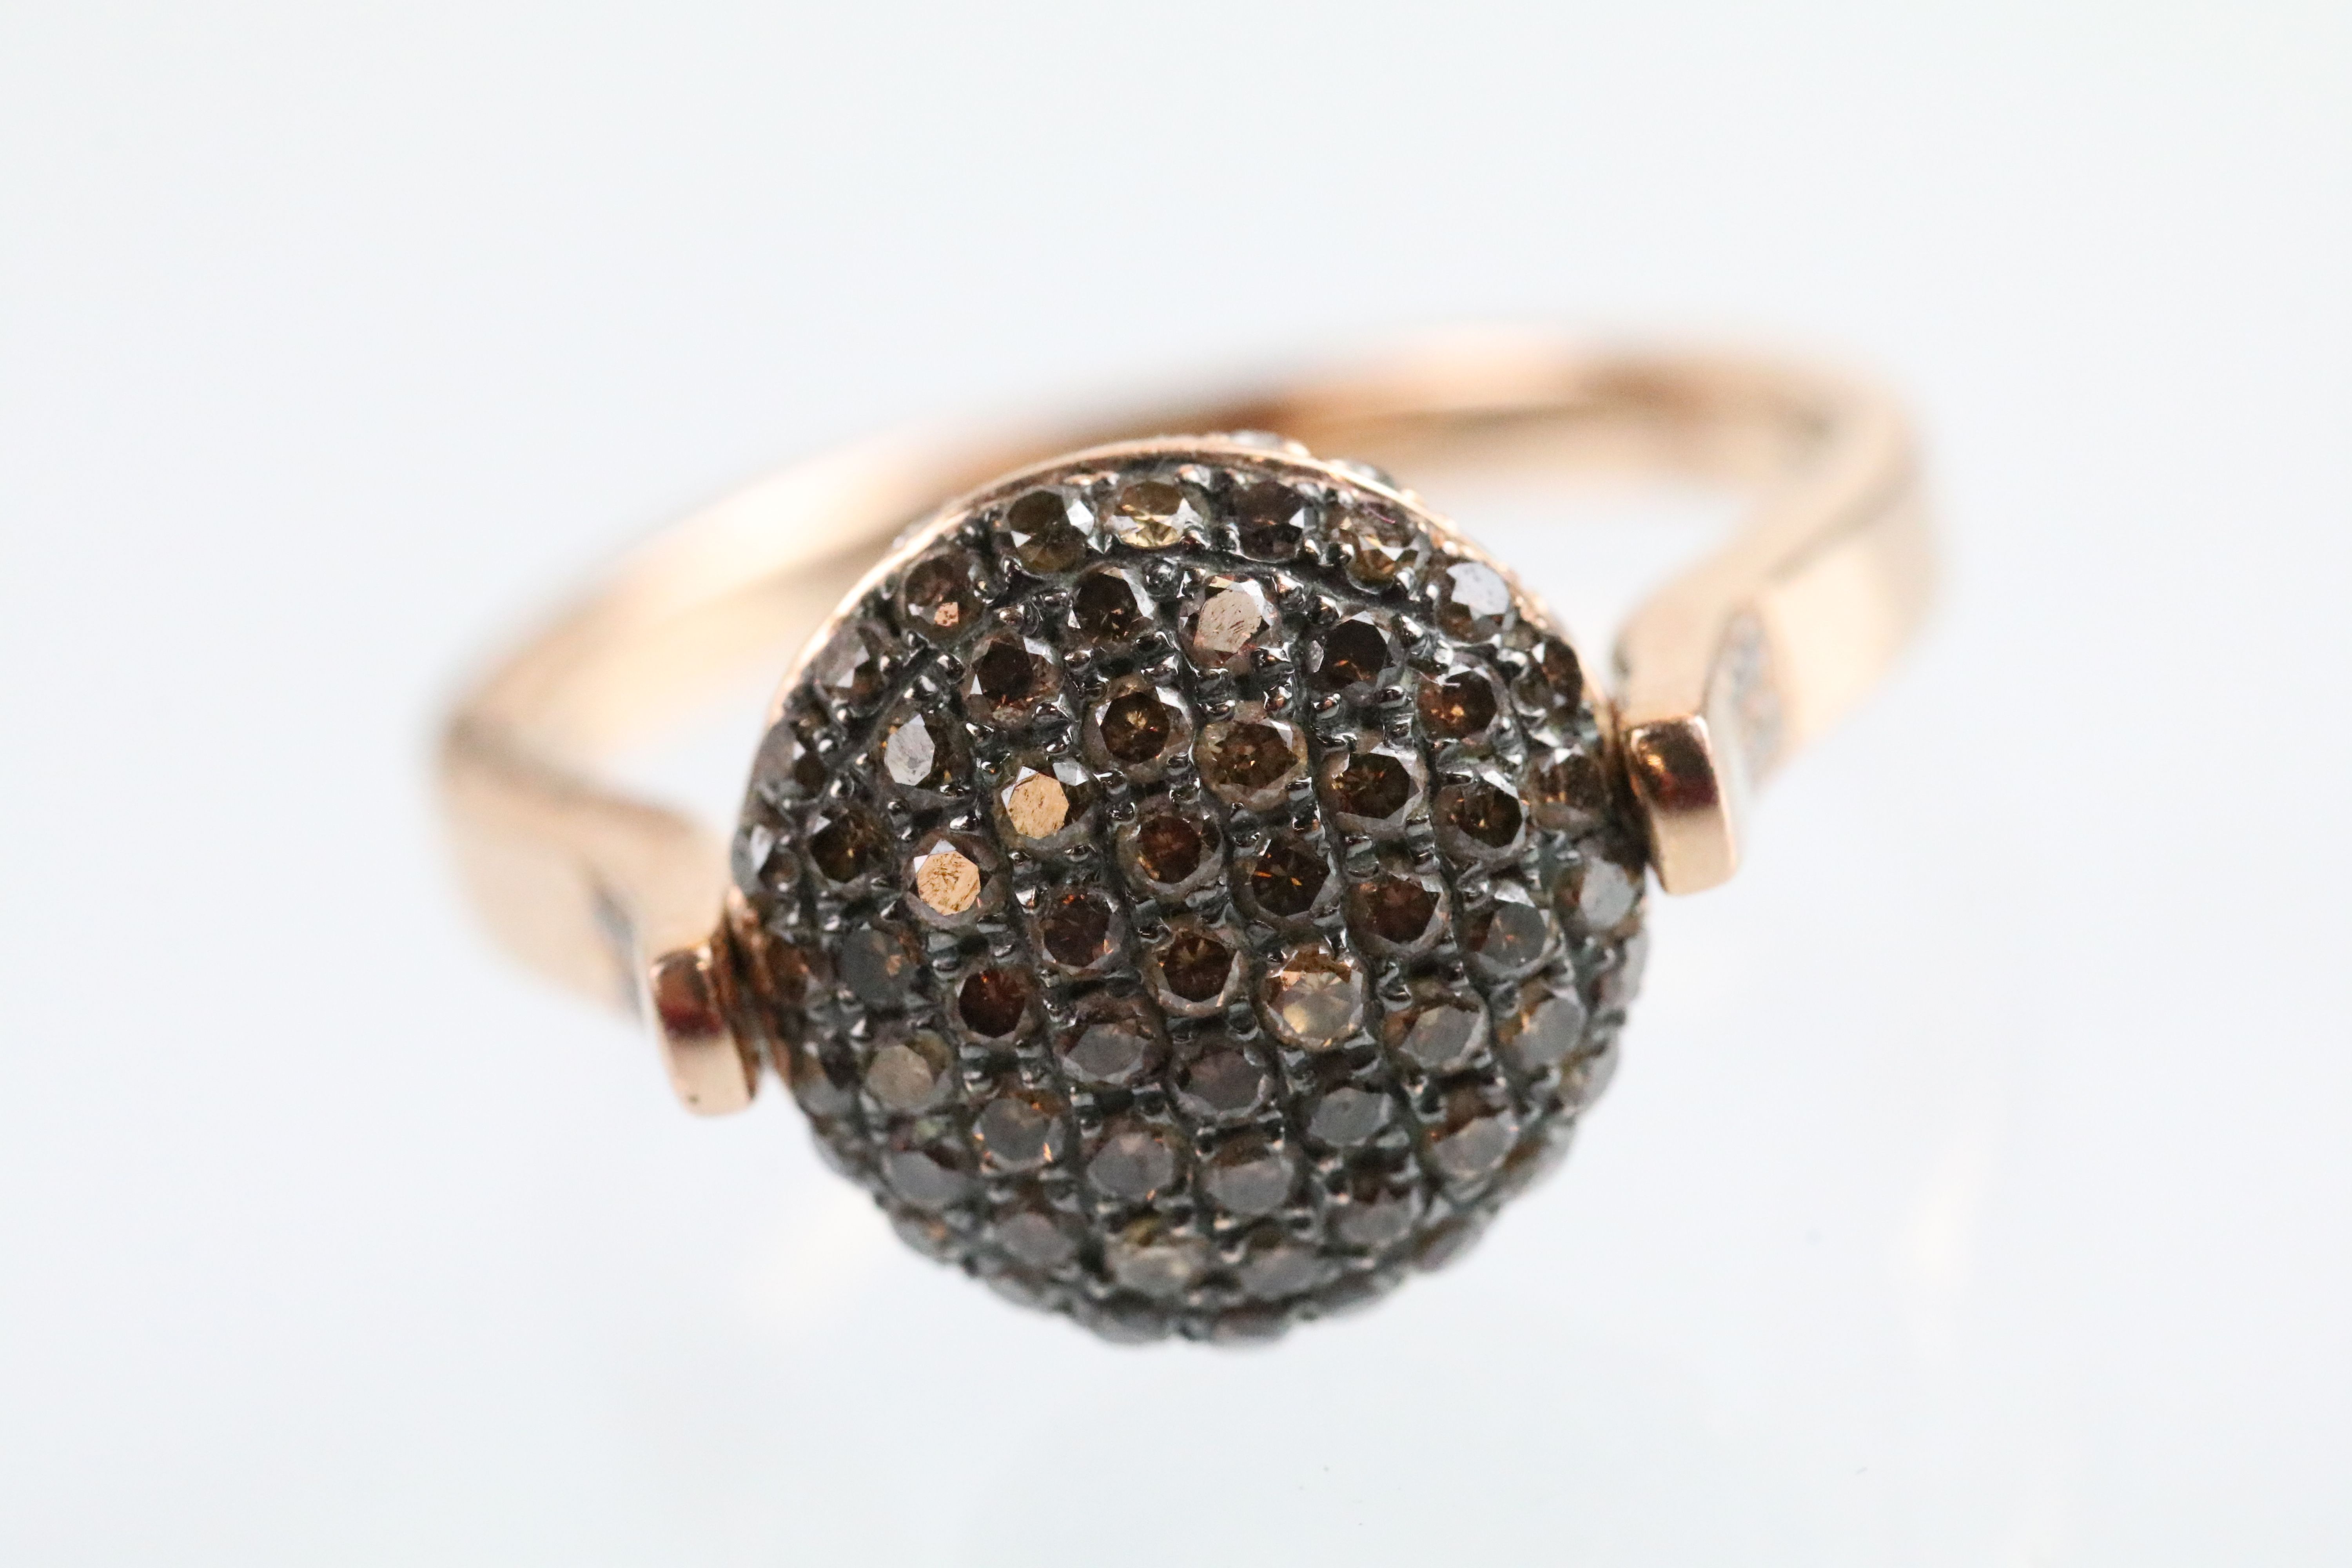 14ct gold and diamond swivel ring. The ring having a round head pave set with round cut diamonds - Image 2 of 5